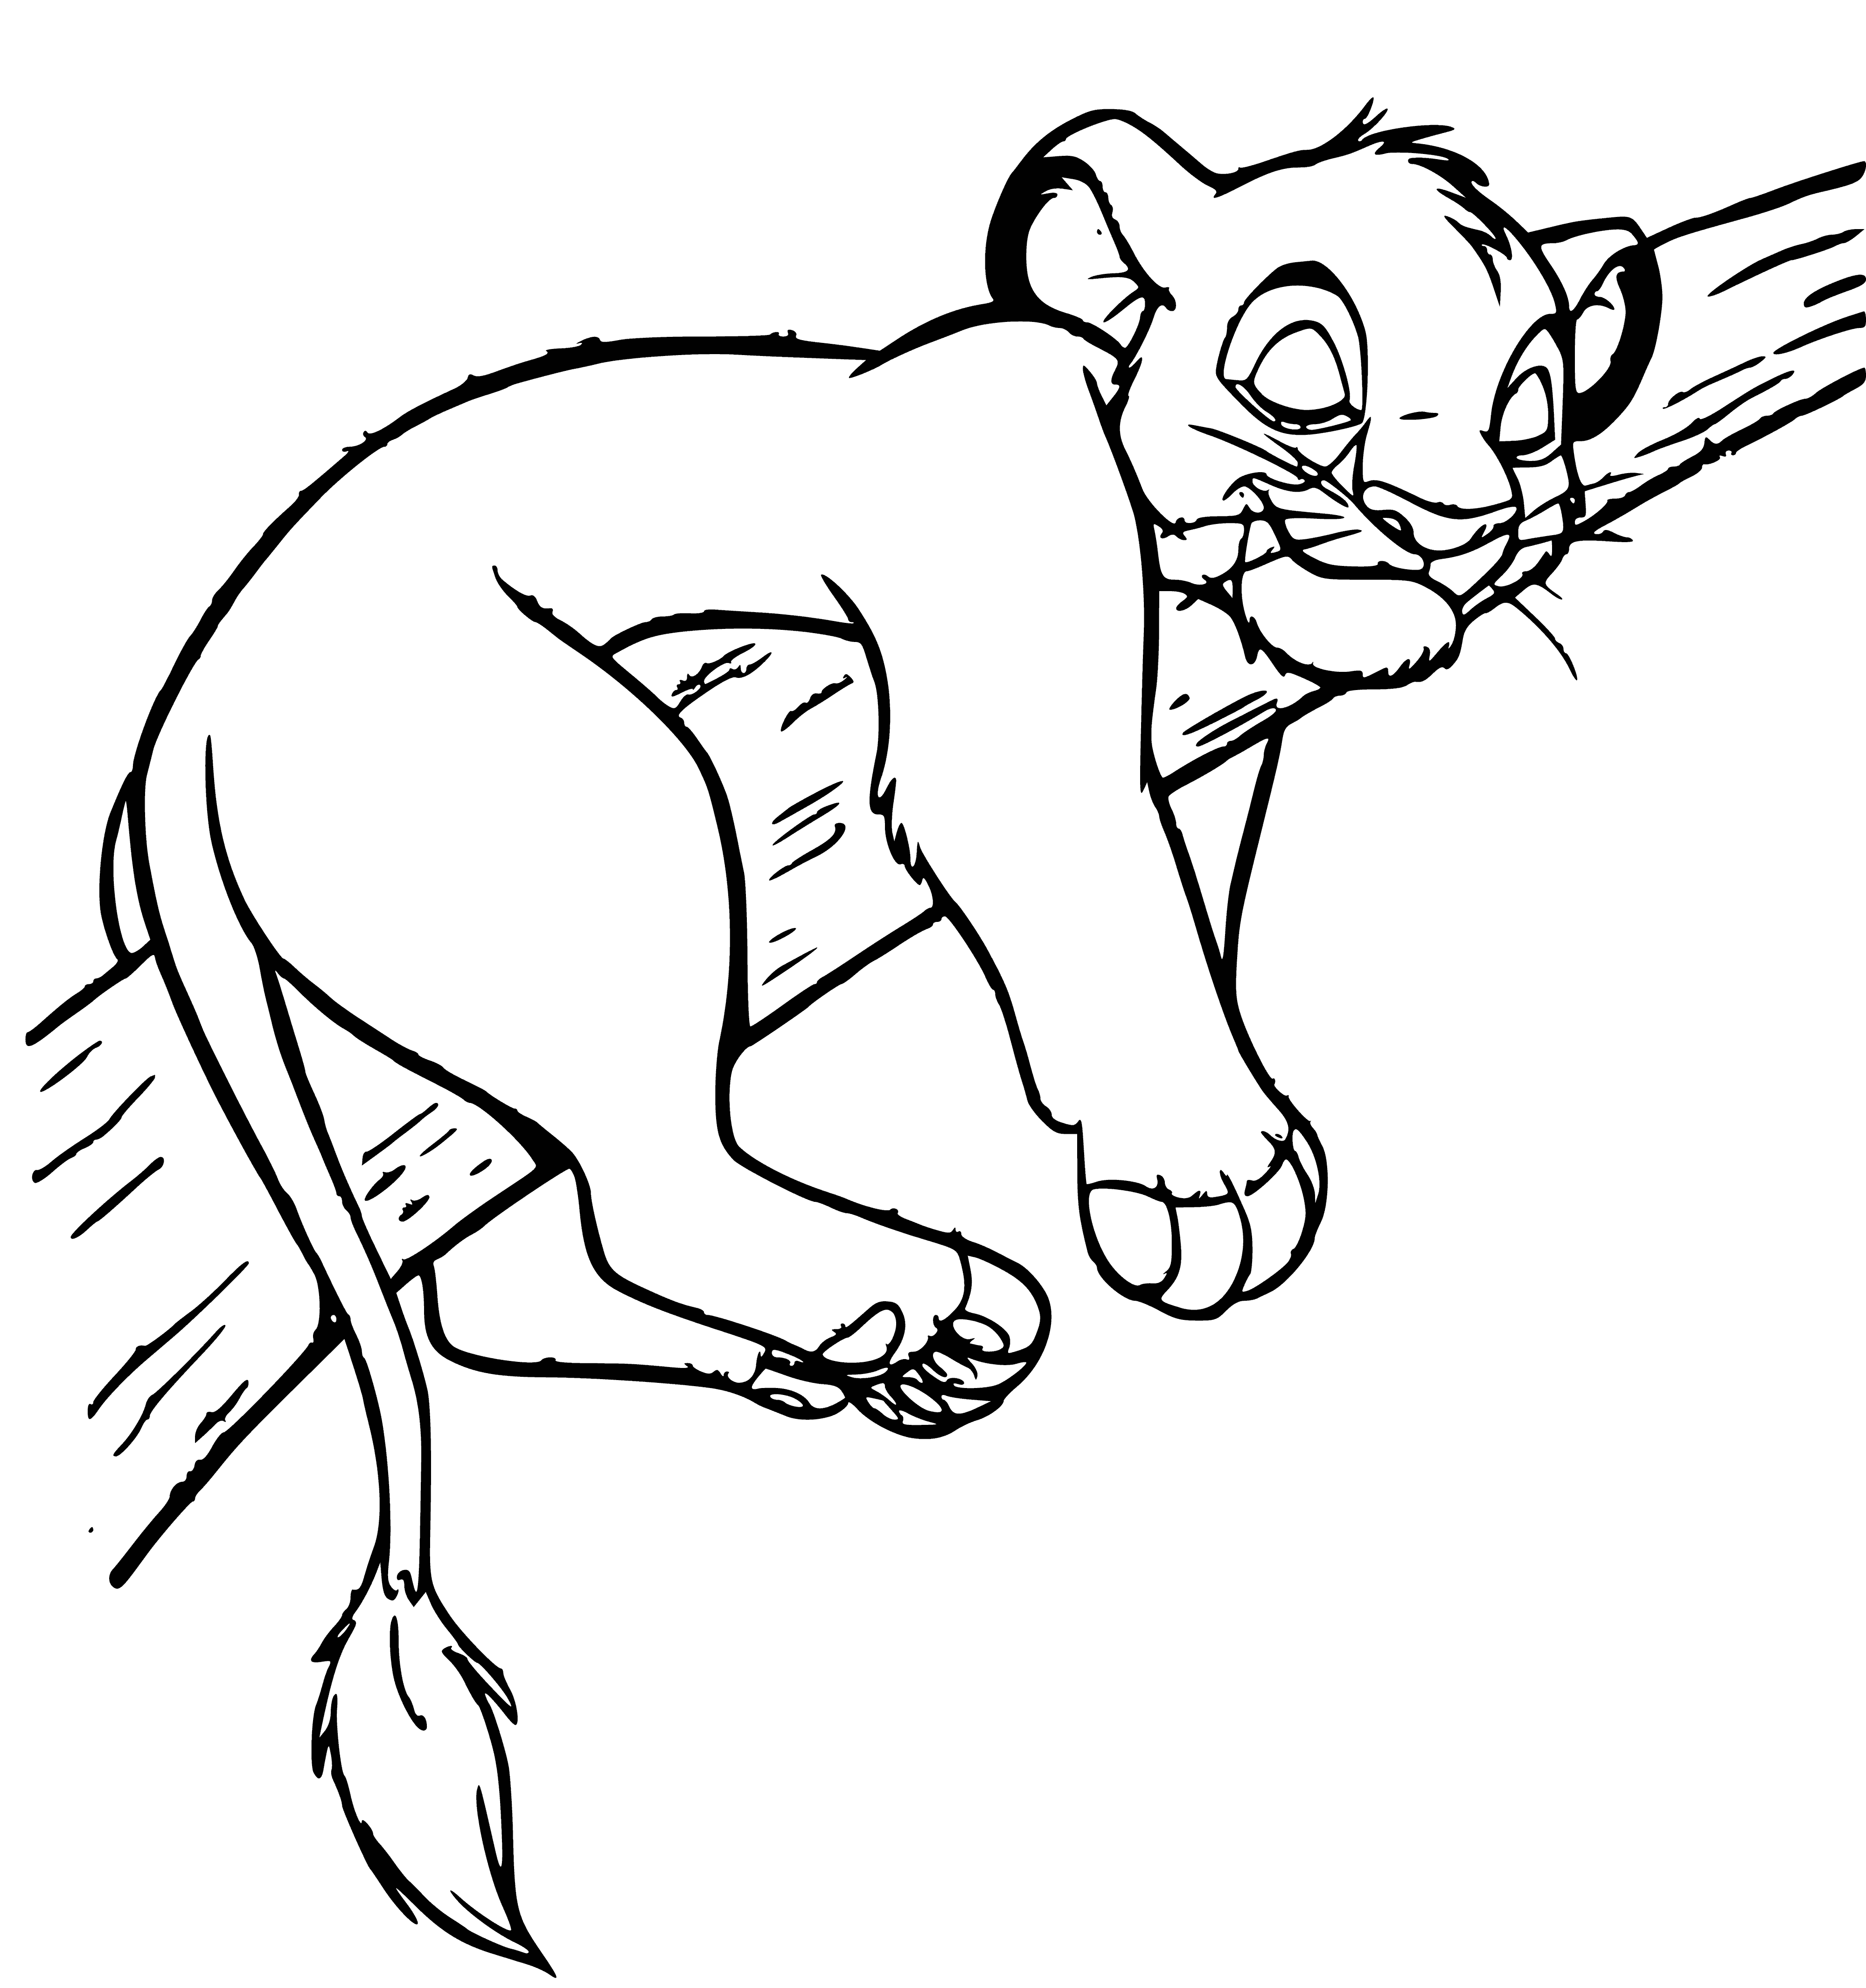 Simba on the trees coloring page